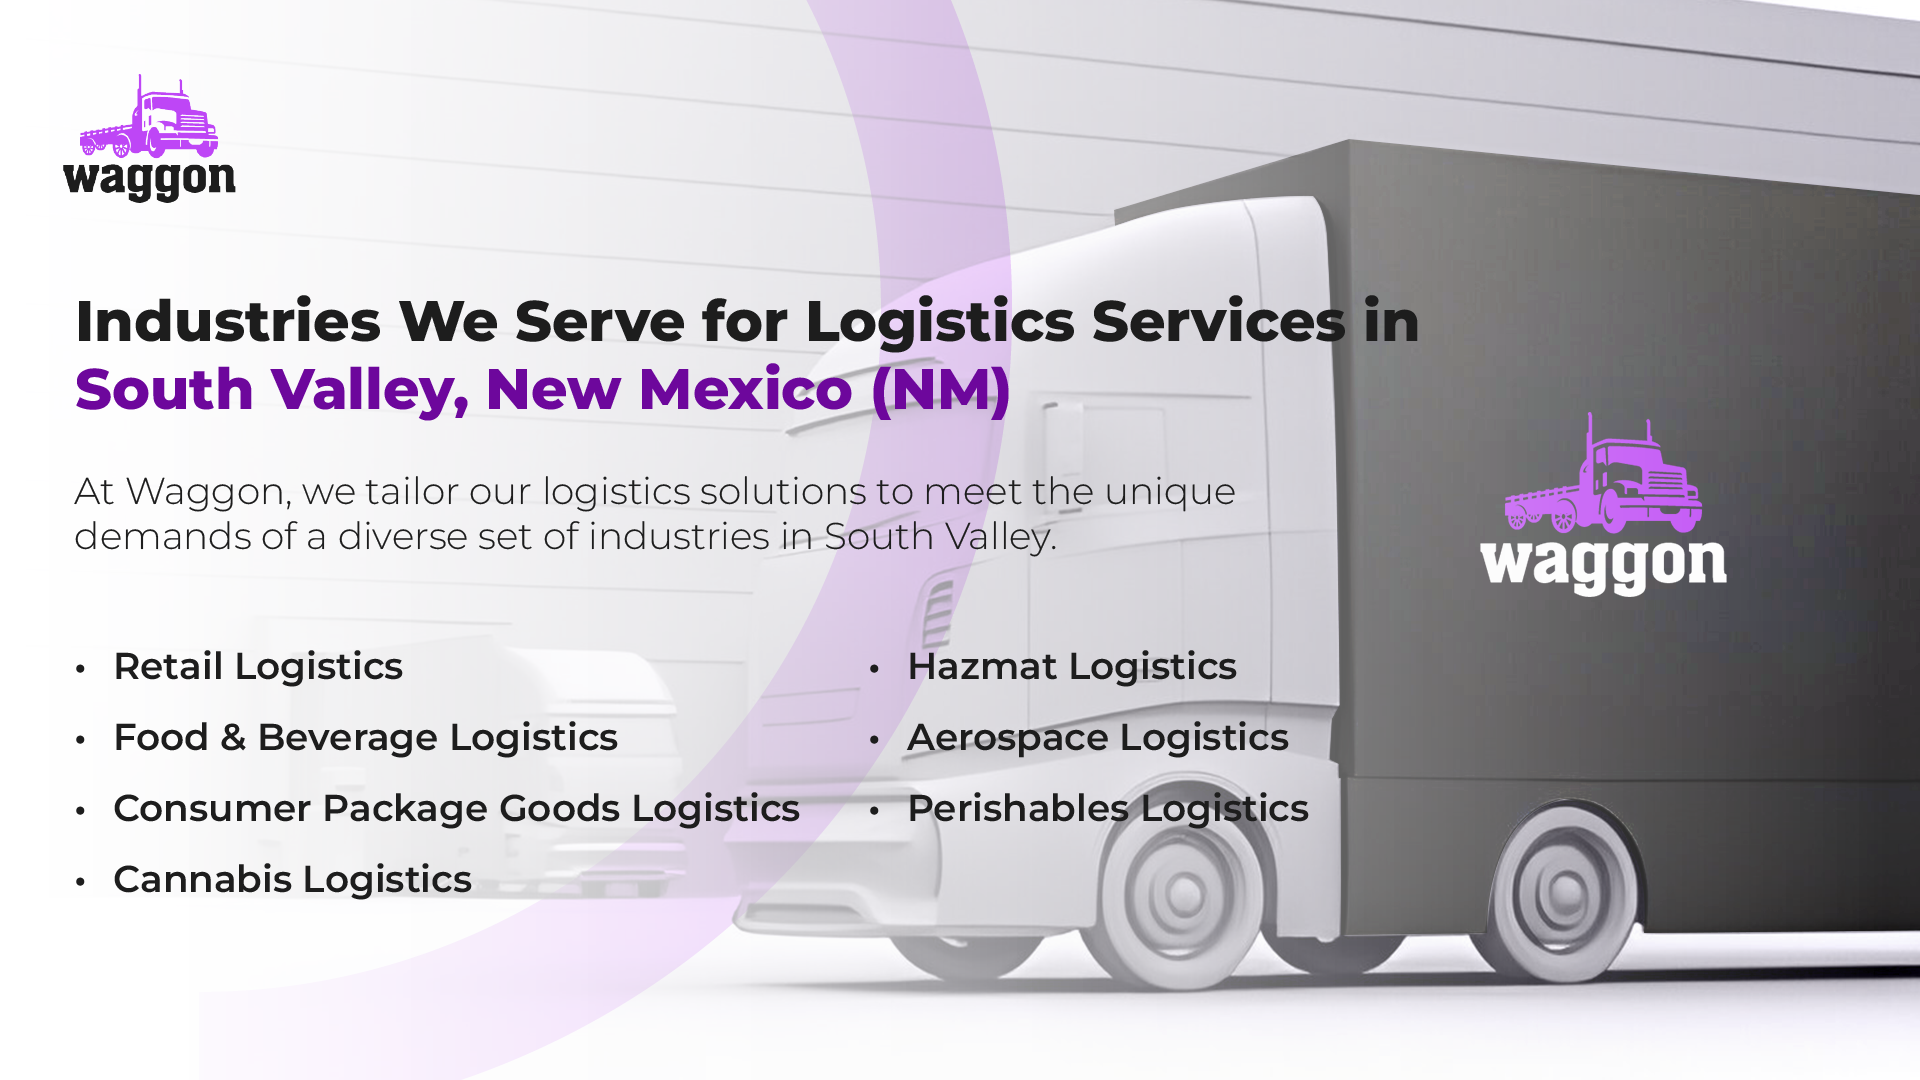 Industries We Serve for Logistics Services in South Valley, New Mexico (NM)